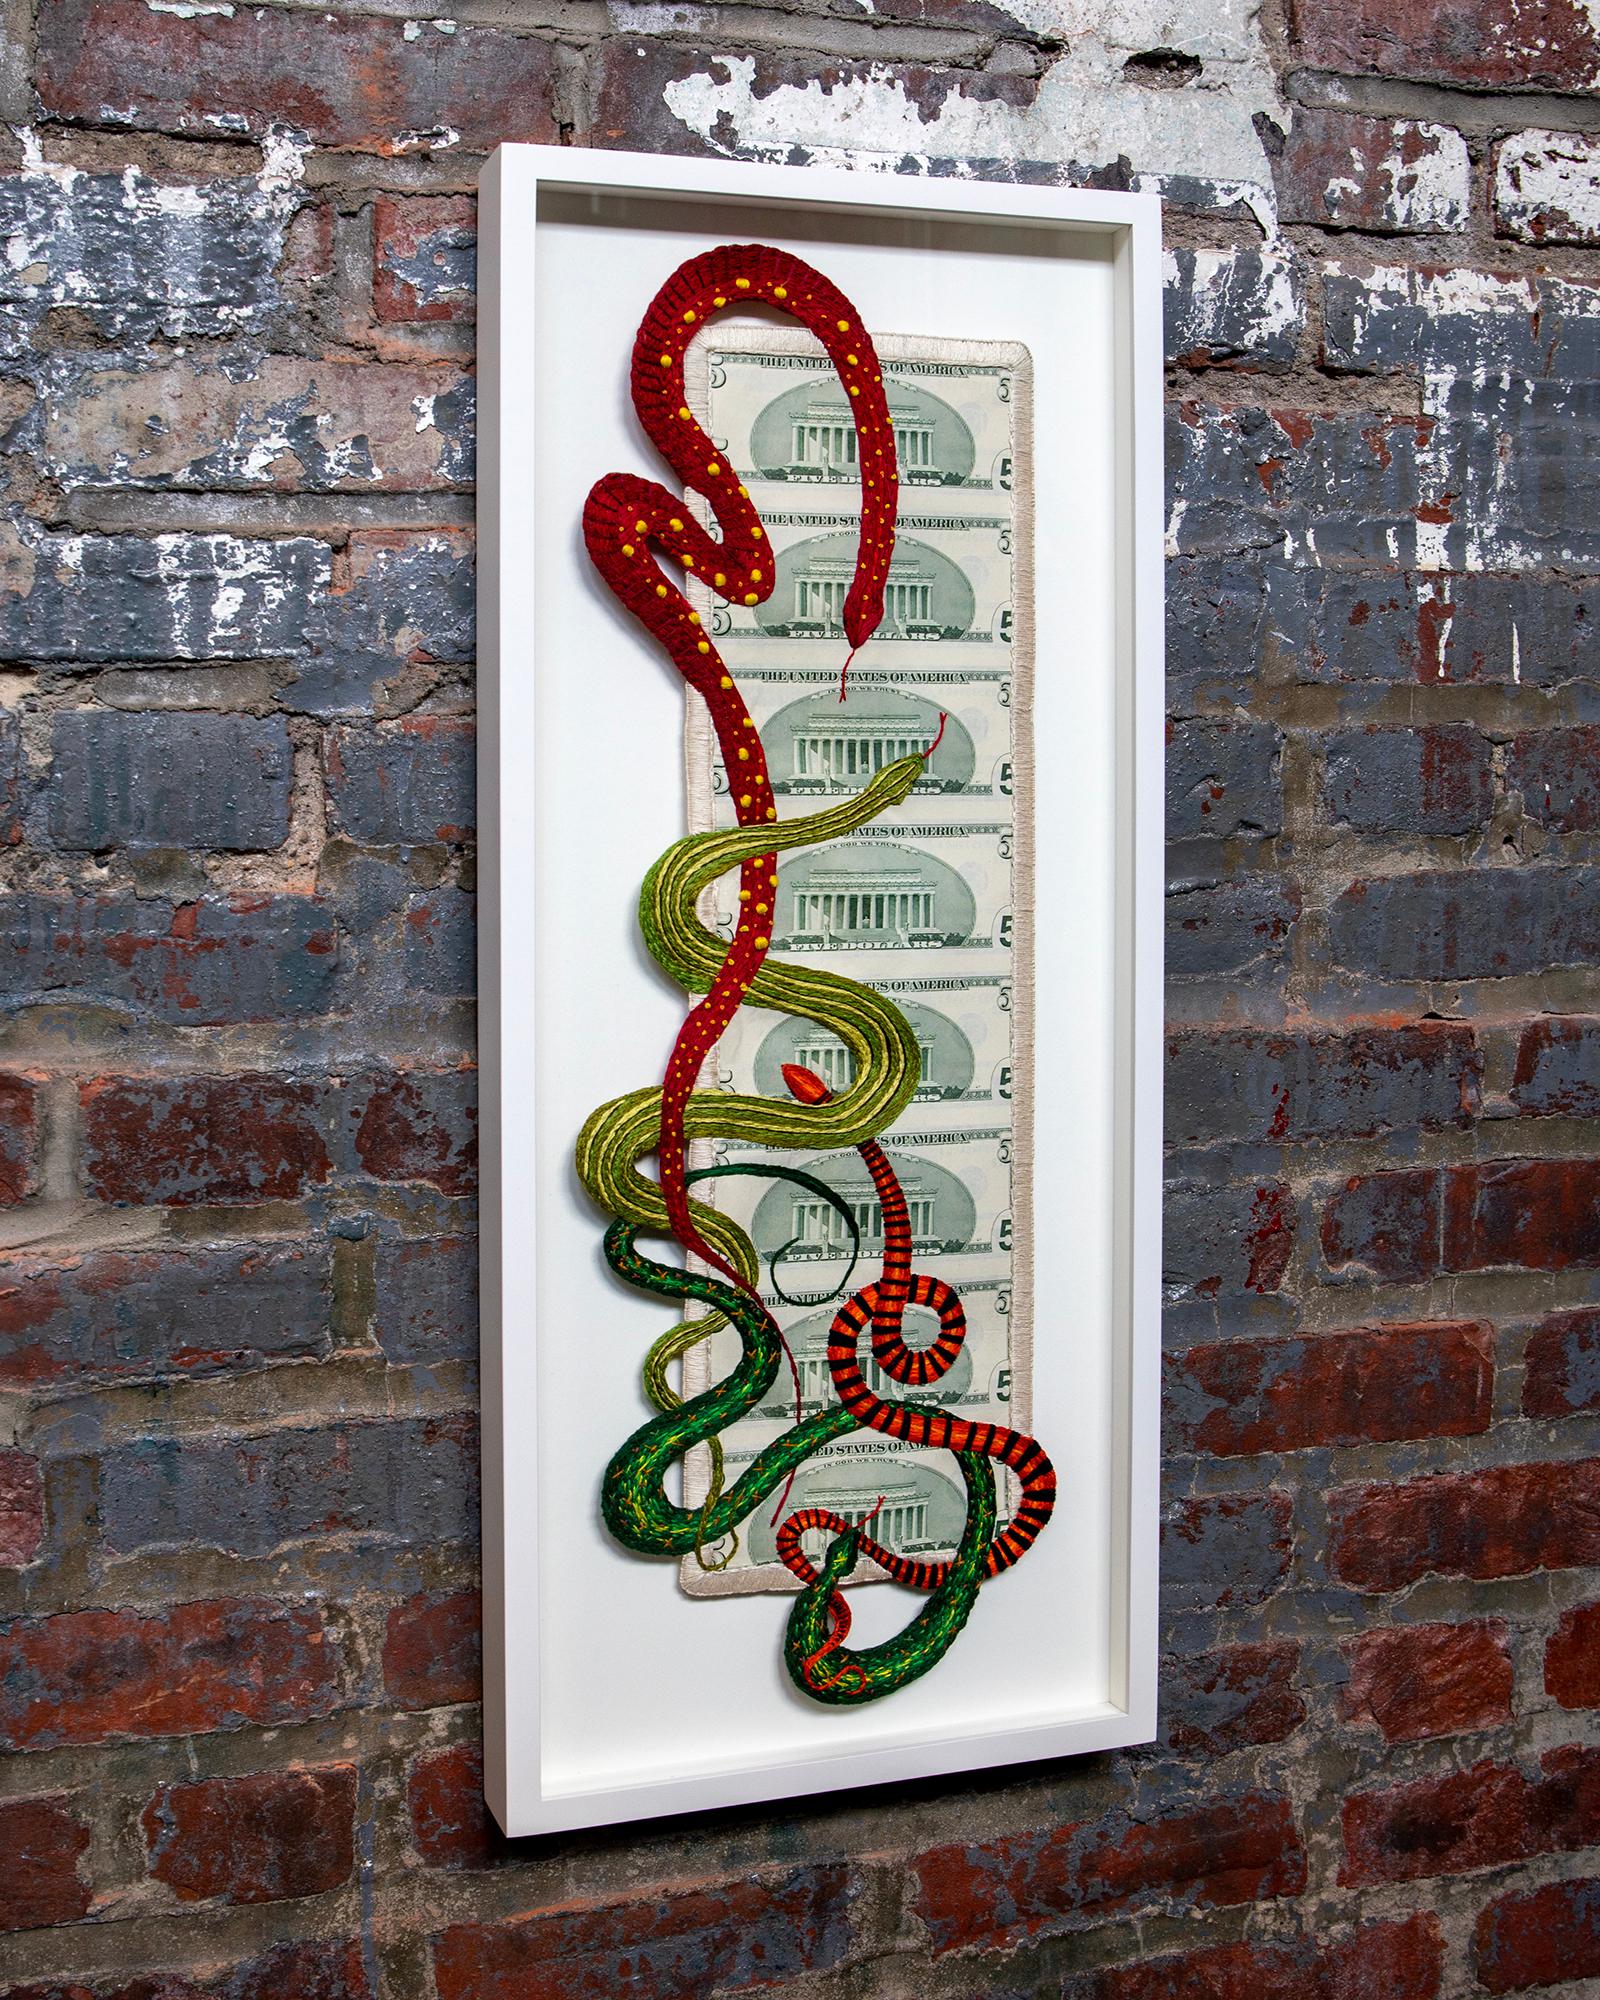 Lincoln Memorial Snakes - Contemporary Mixed Media Art by Stacey Lee Webber